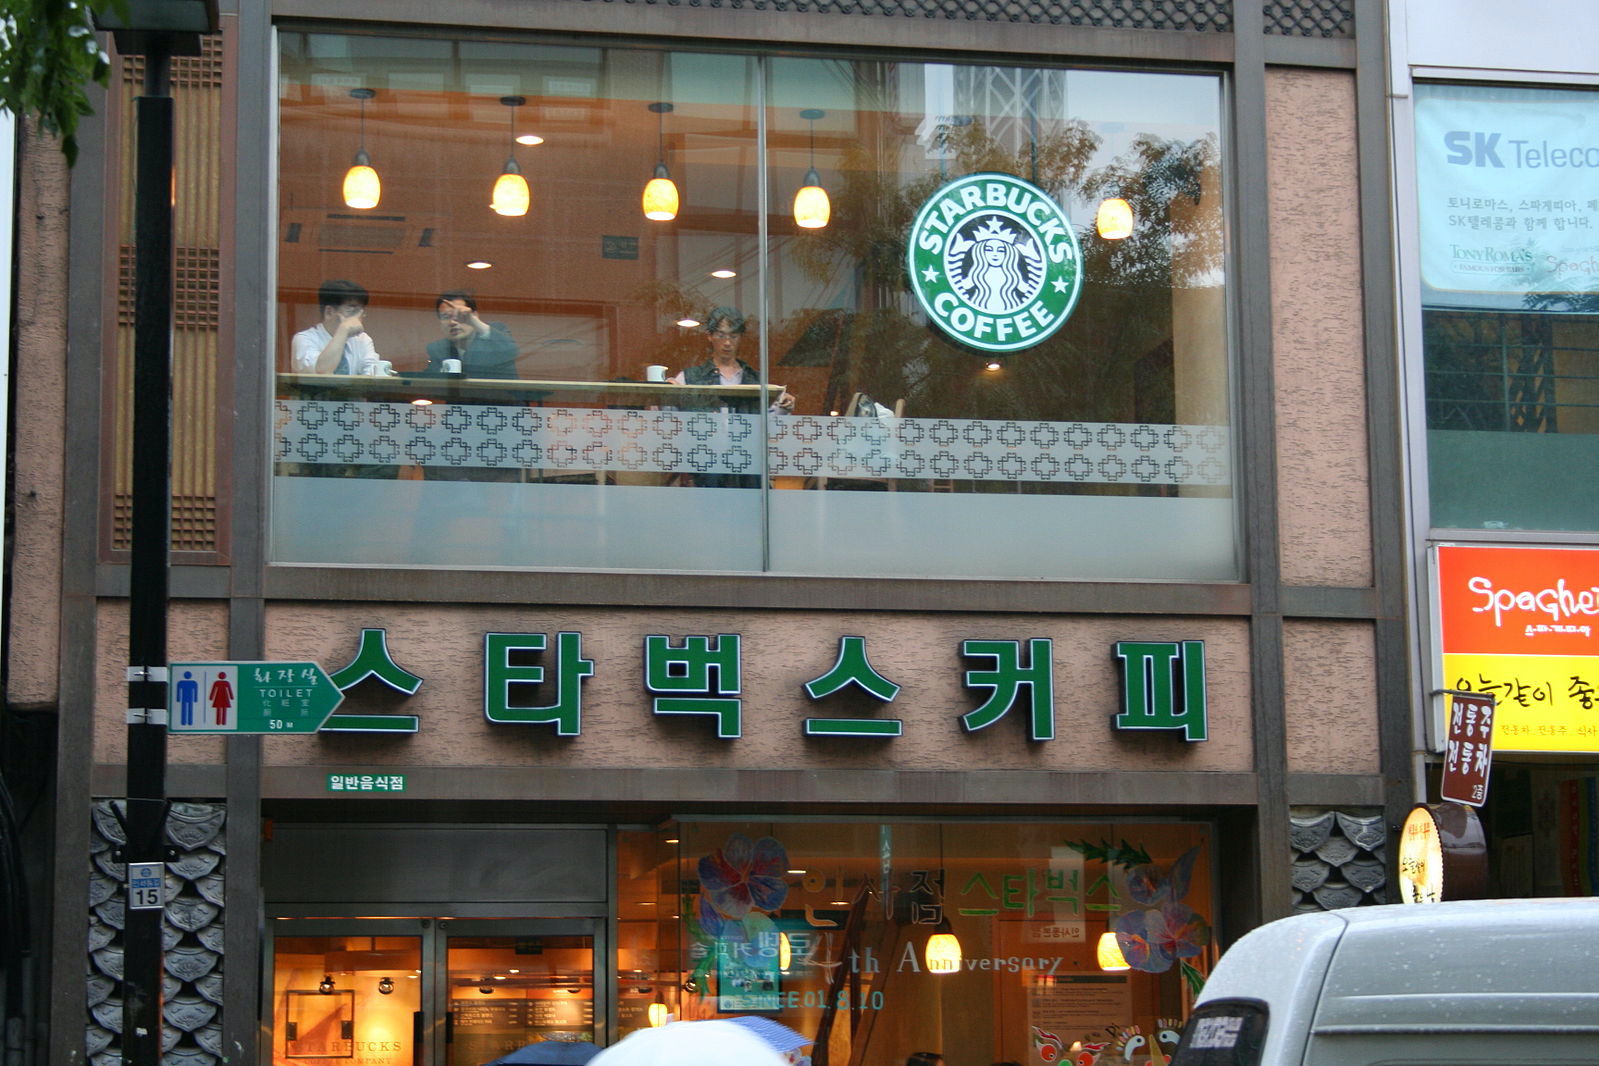 Street view of a Starbucks in Seoul, South Korea. There are green Korean characters on the building.